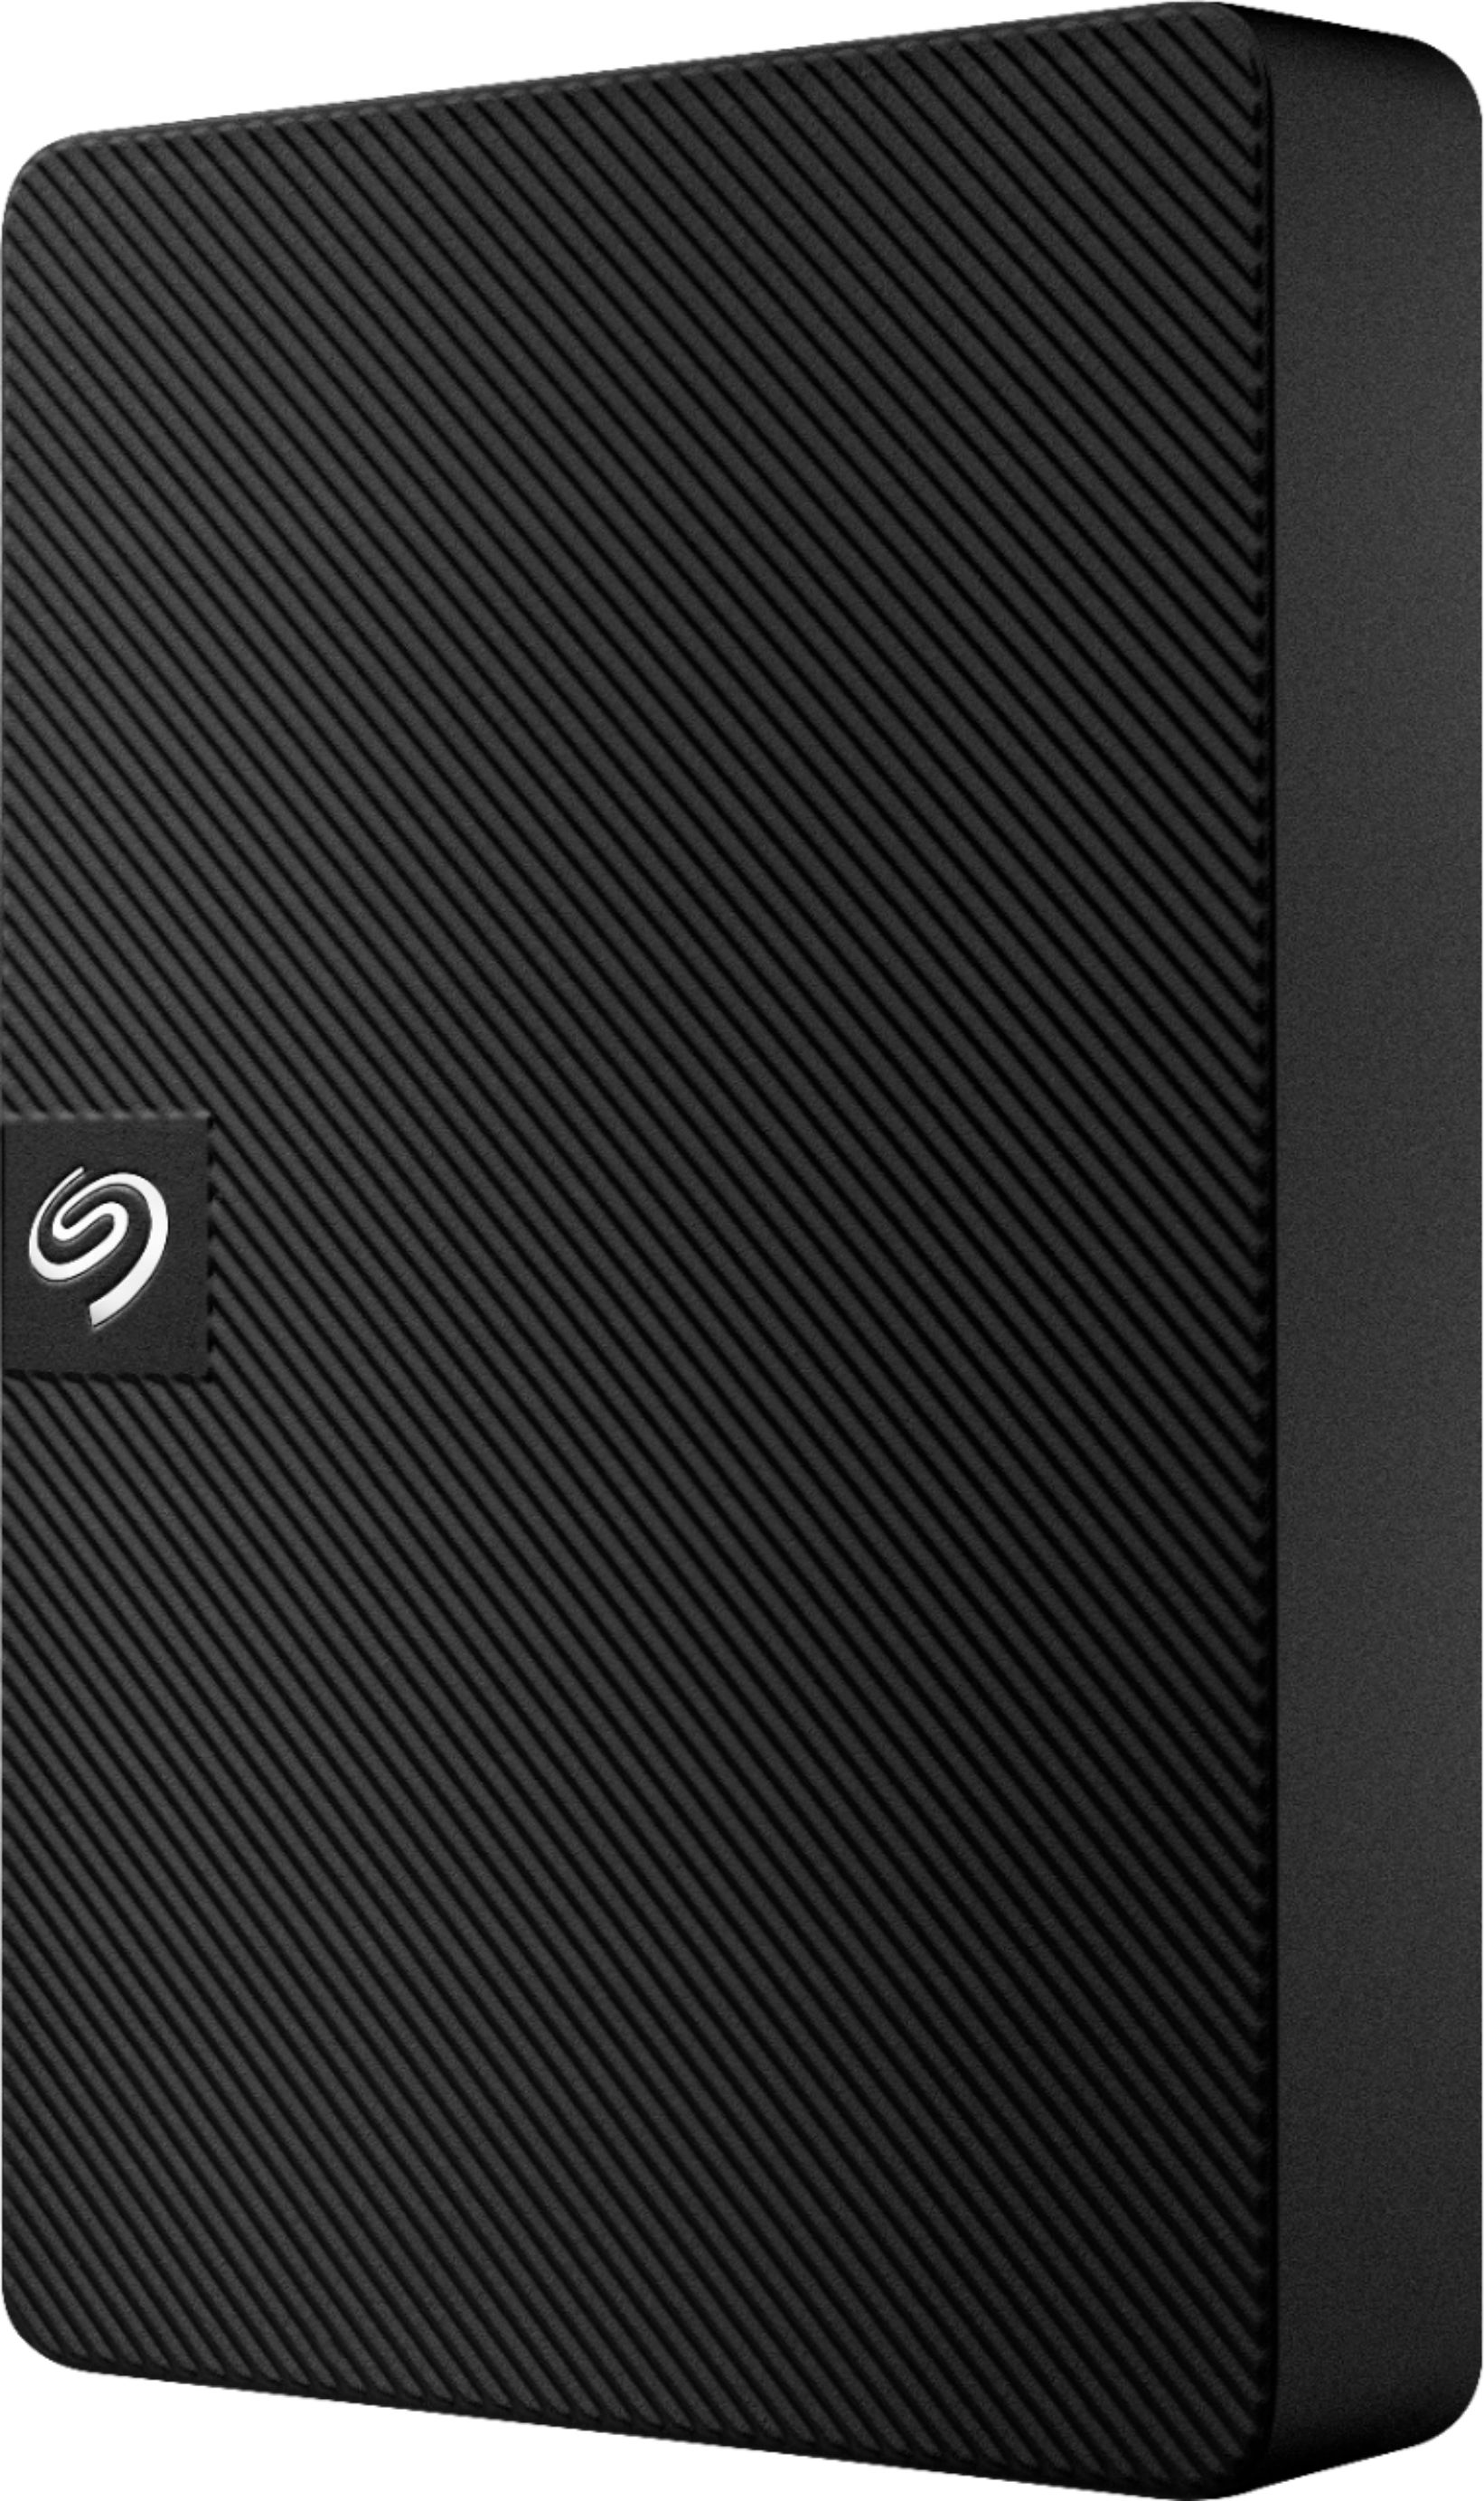 Seagate Expansion 4TB External 3.0 Portable Drive with Rescue Data Recovery Services Black STKM4000400 - Best